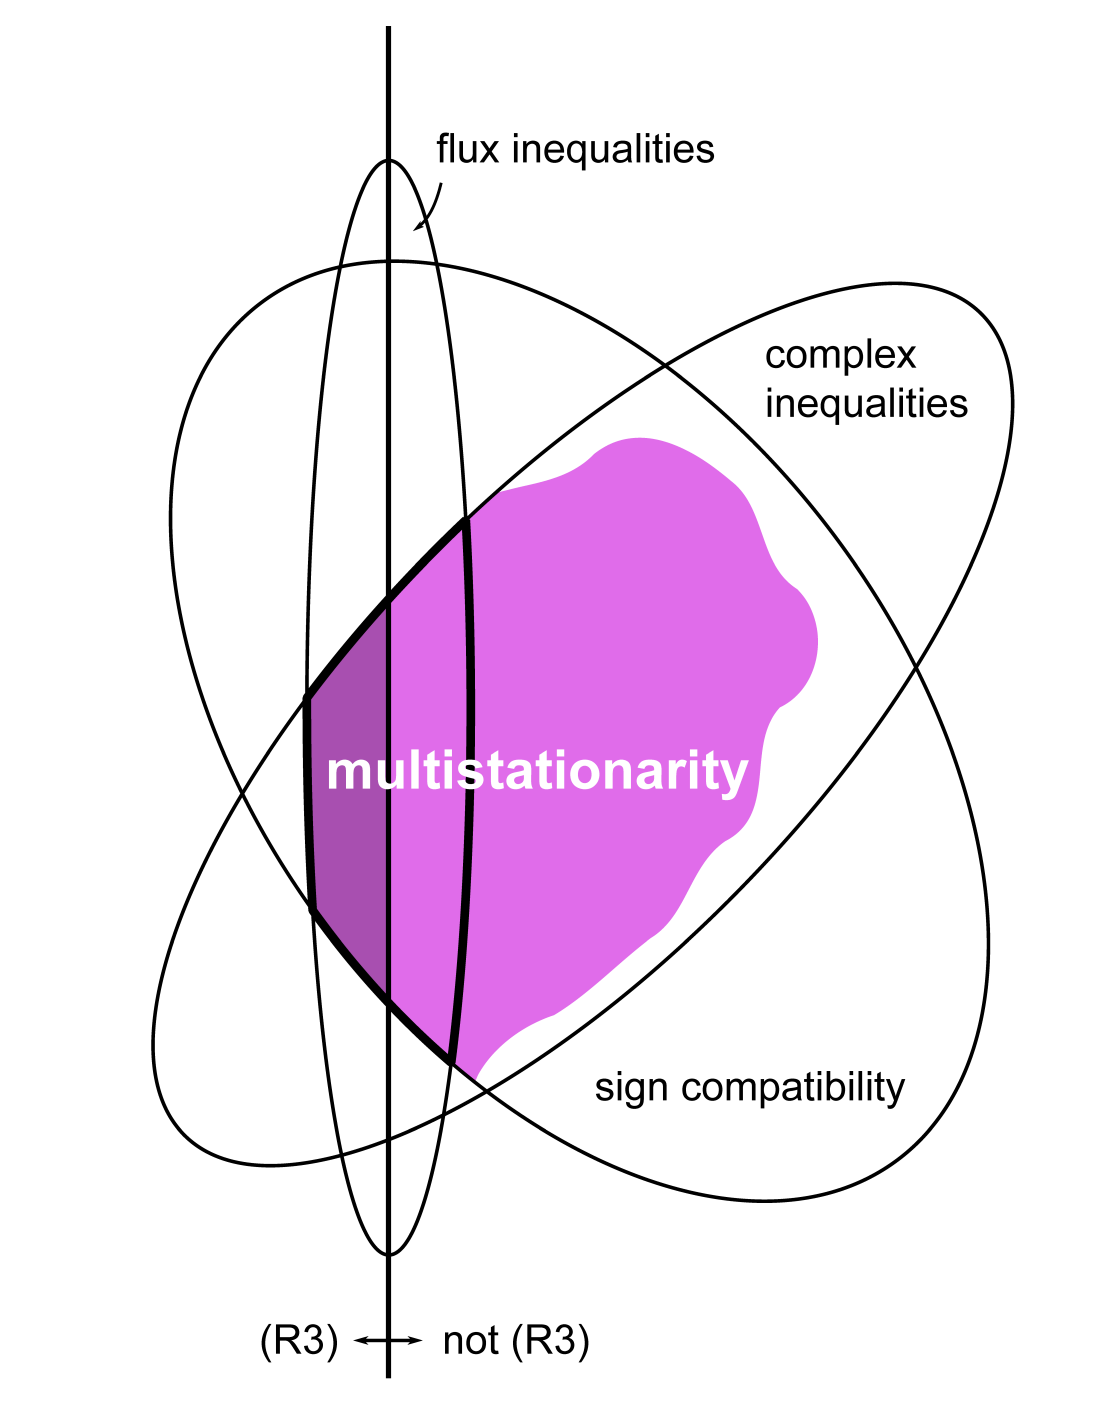 Enlarged view: Relation between constraints and multistationarity in a network.